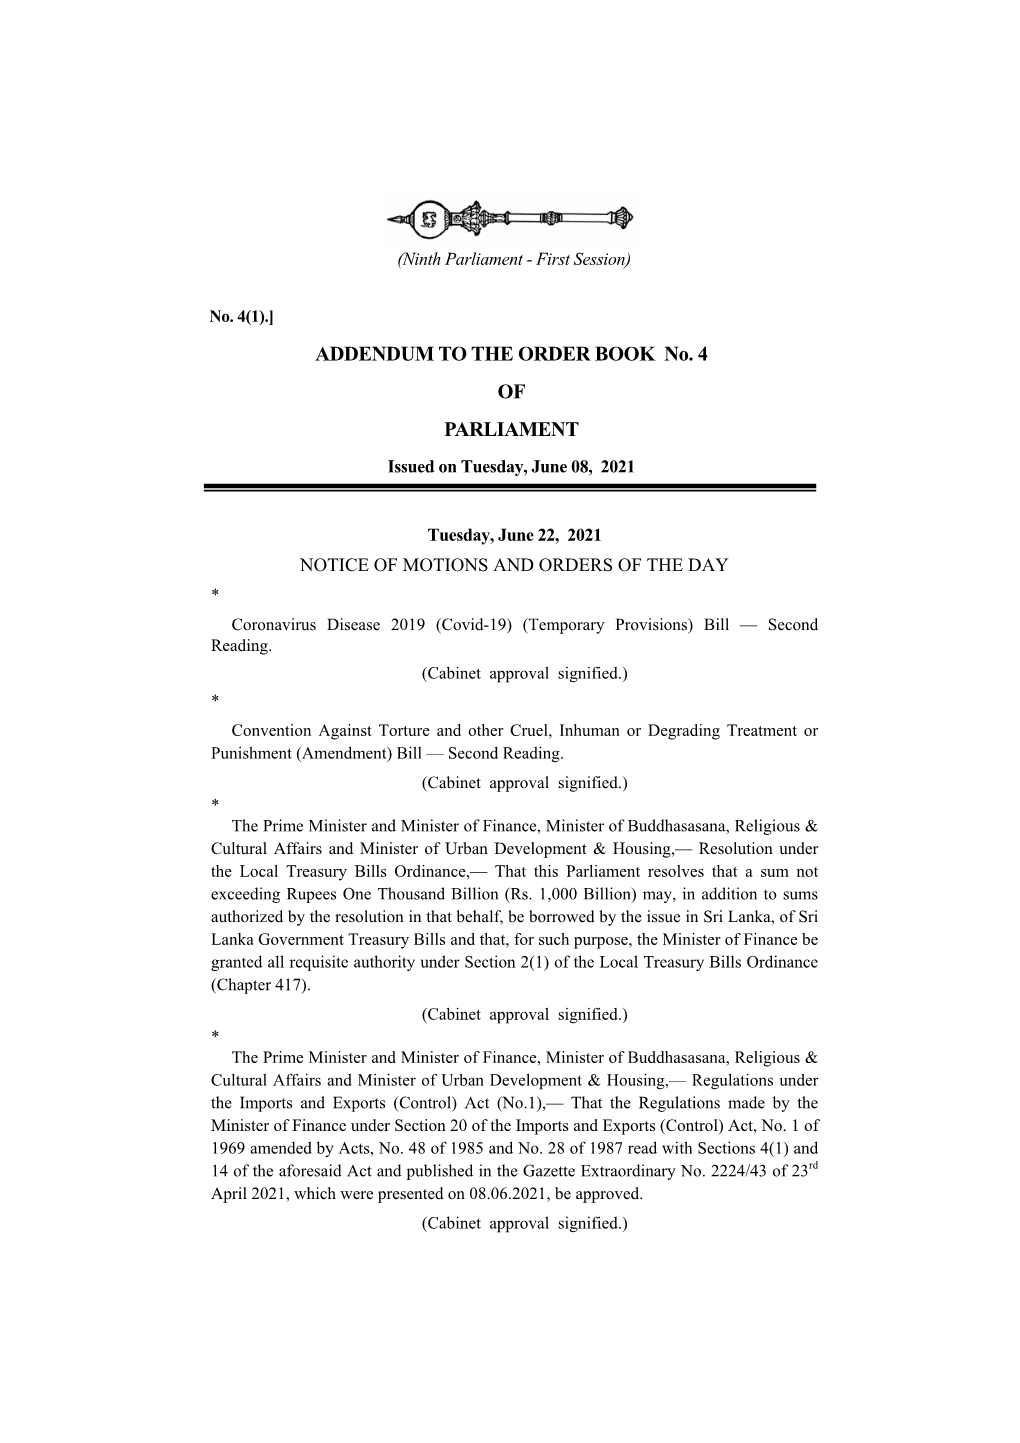 ADDENDUM to the ORDER BOOK No. 4 of PARLIAMENT Issued on Tuesday, June 08, 2021